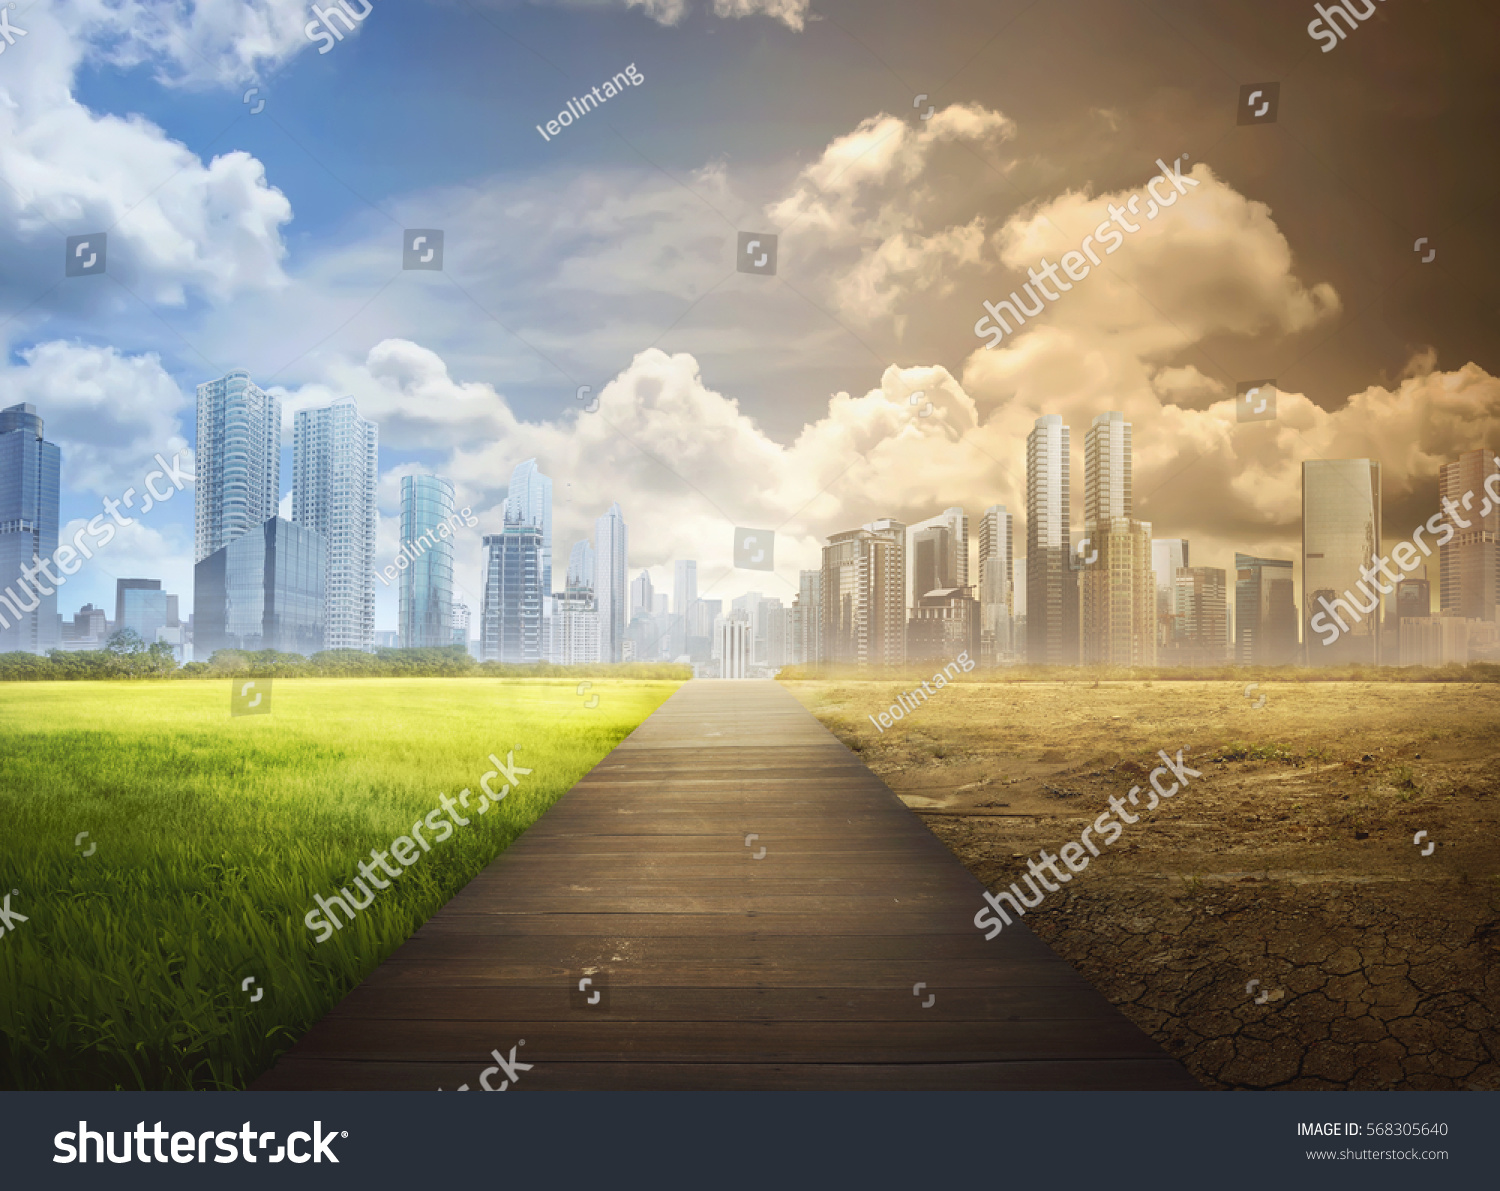 Landscape of timber pathway with the changing environment in the modern city #568305640